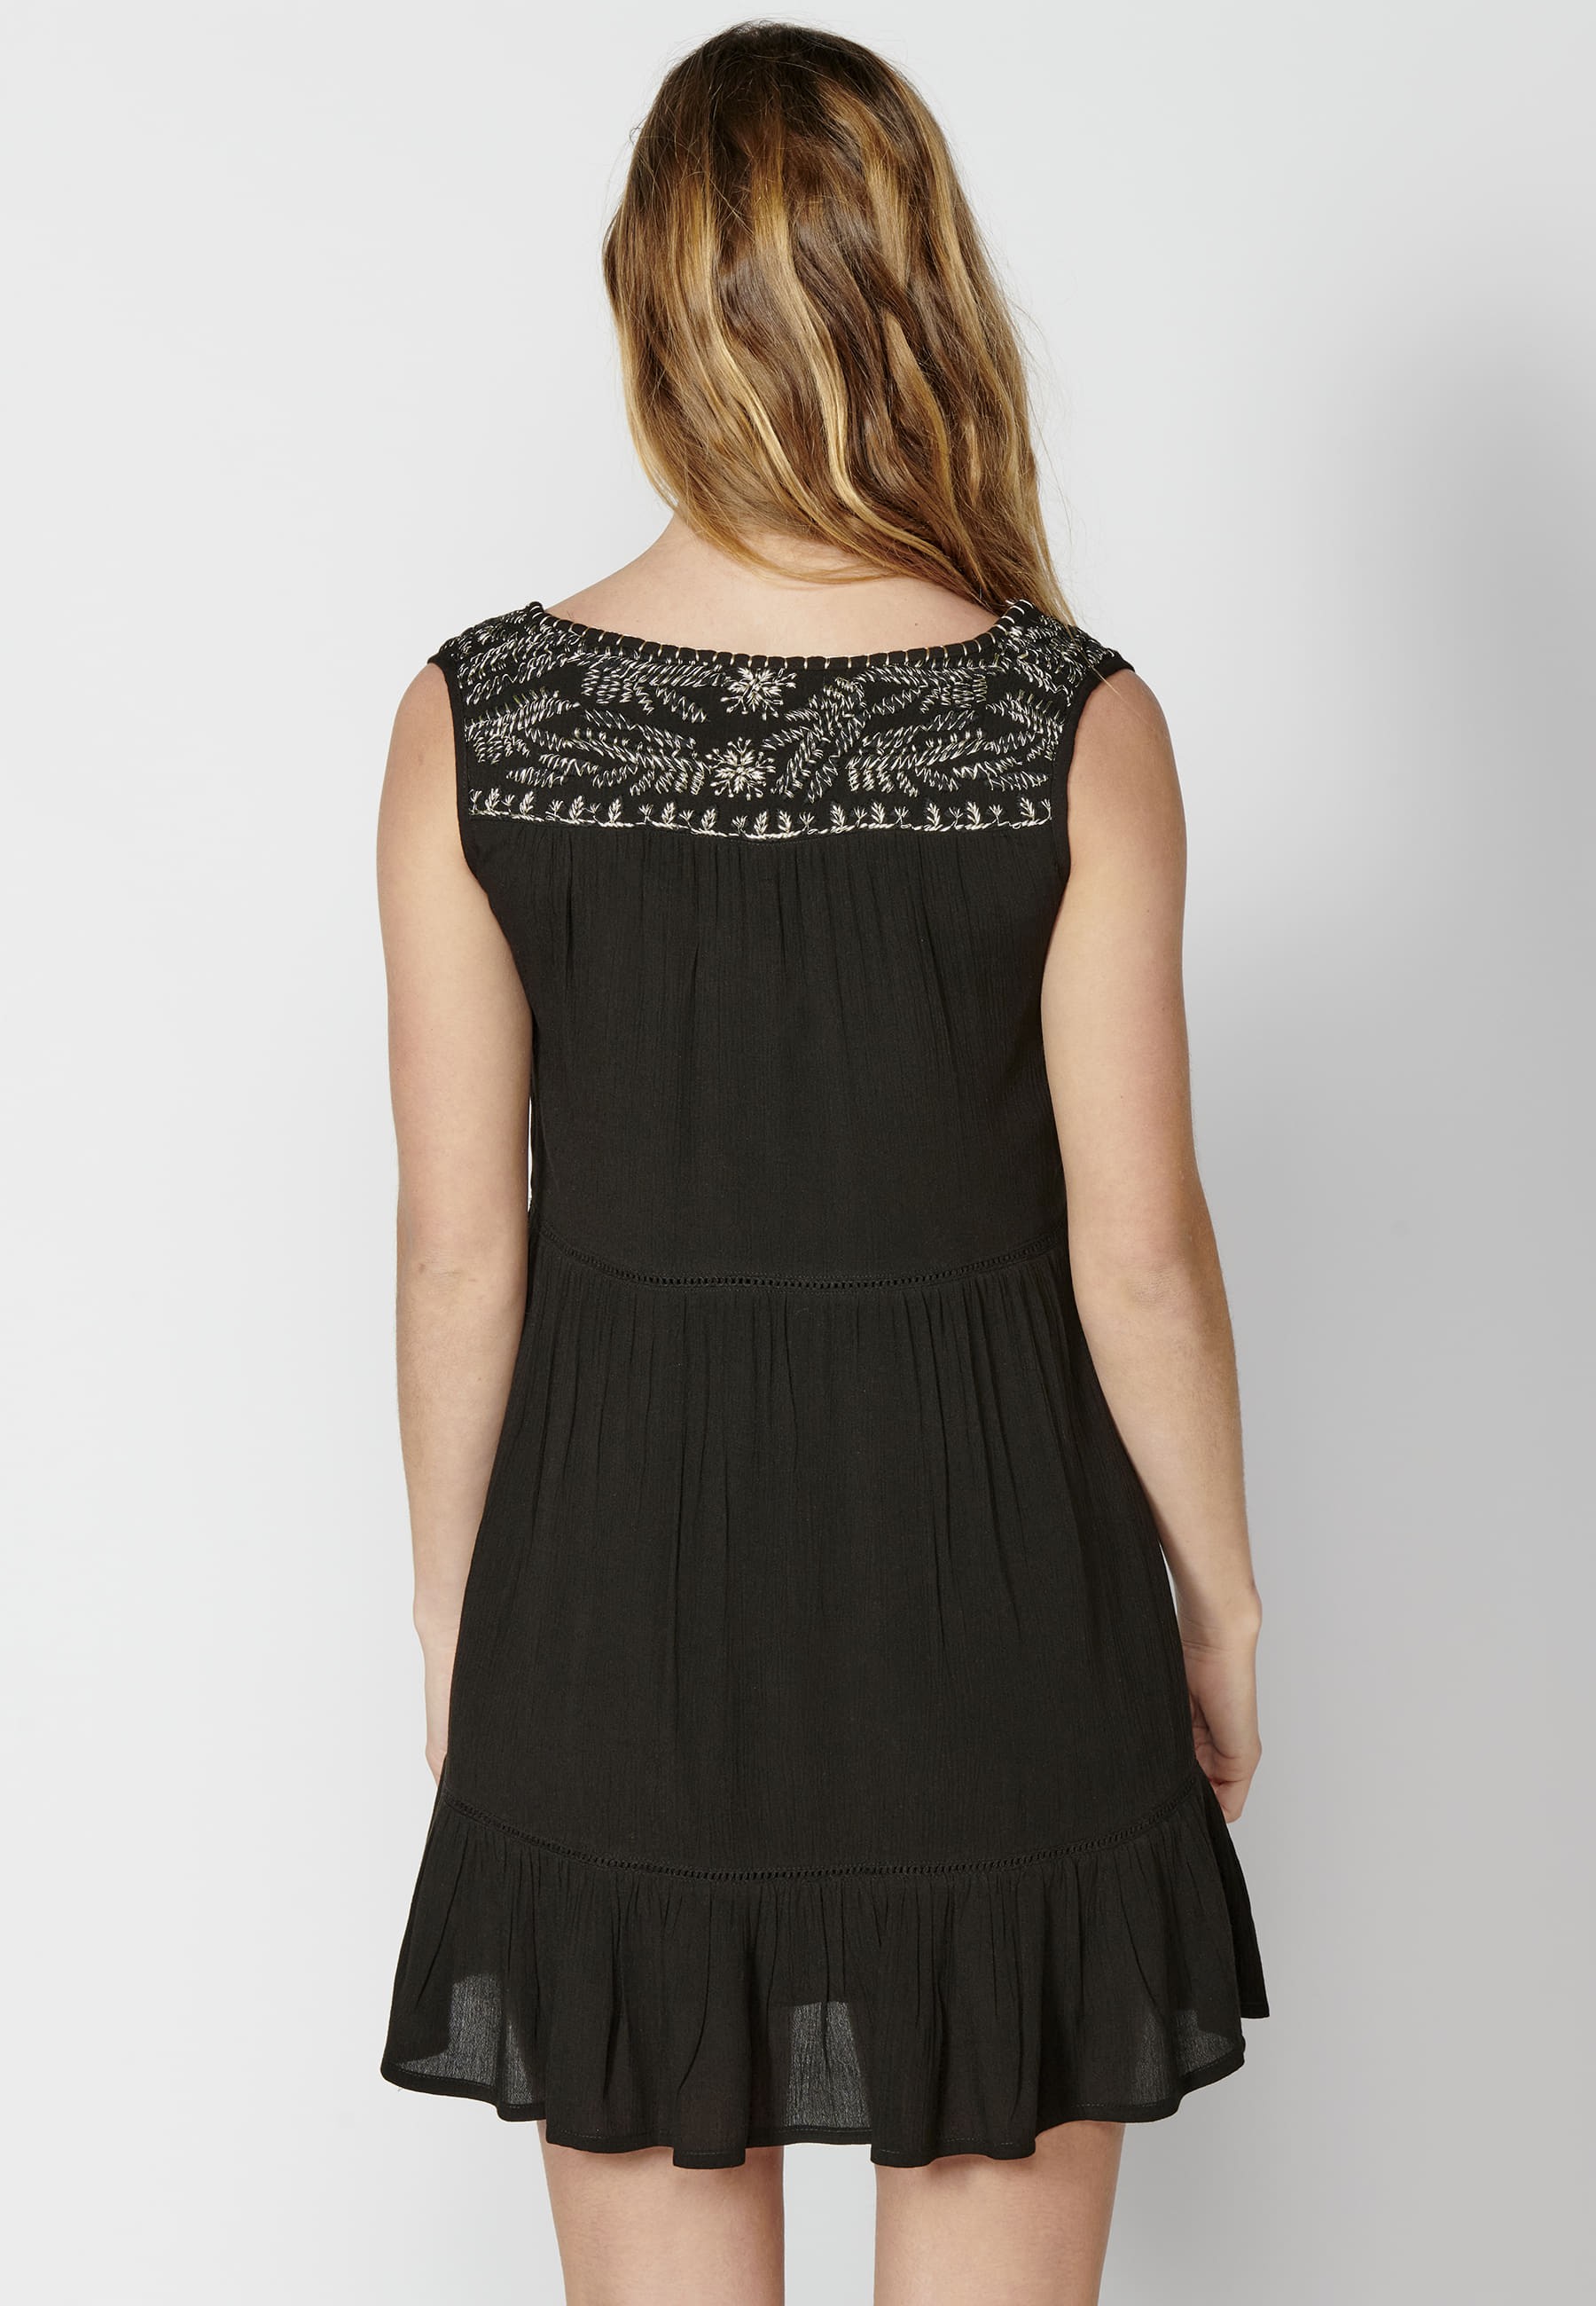 Flowy dress with straps with embroidered detail in Black color for Woman